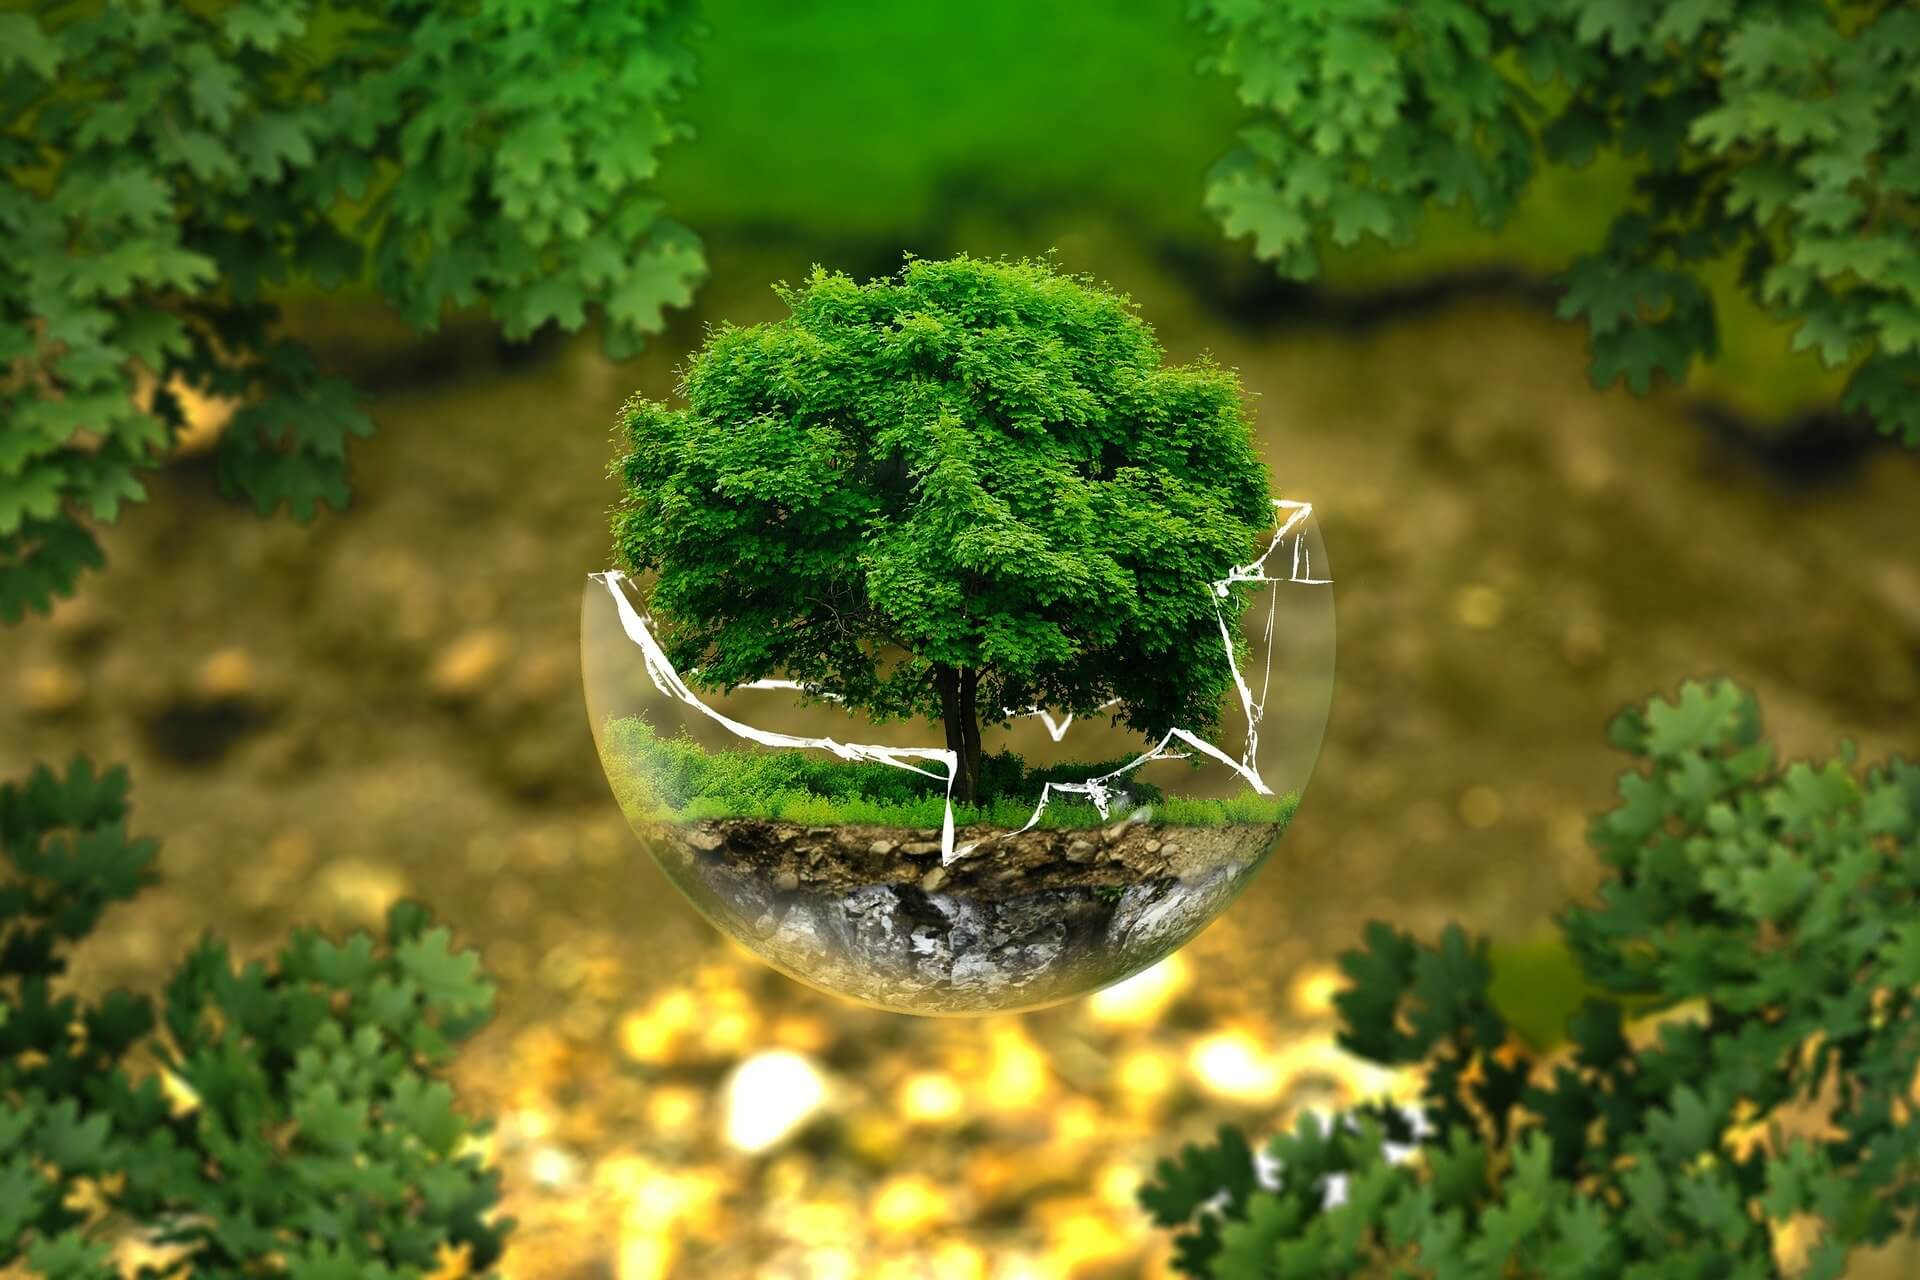 A bonsai tree coming out of a glass